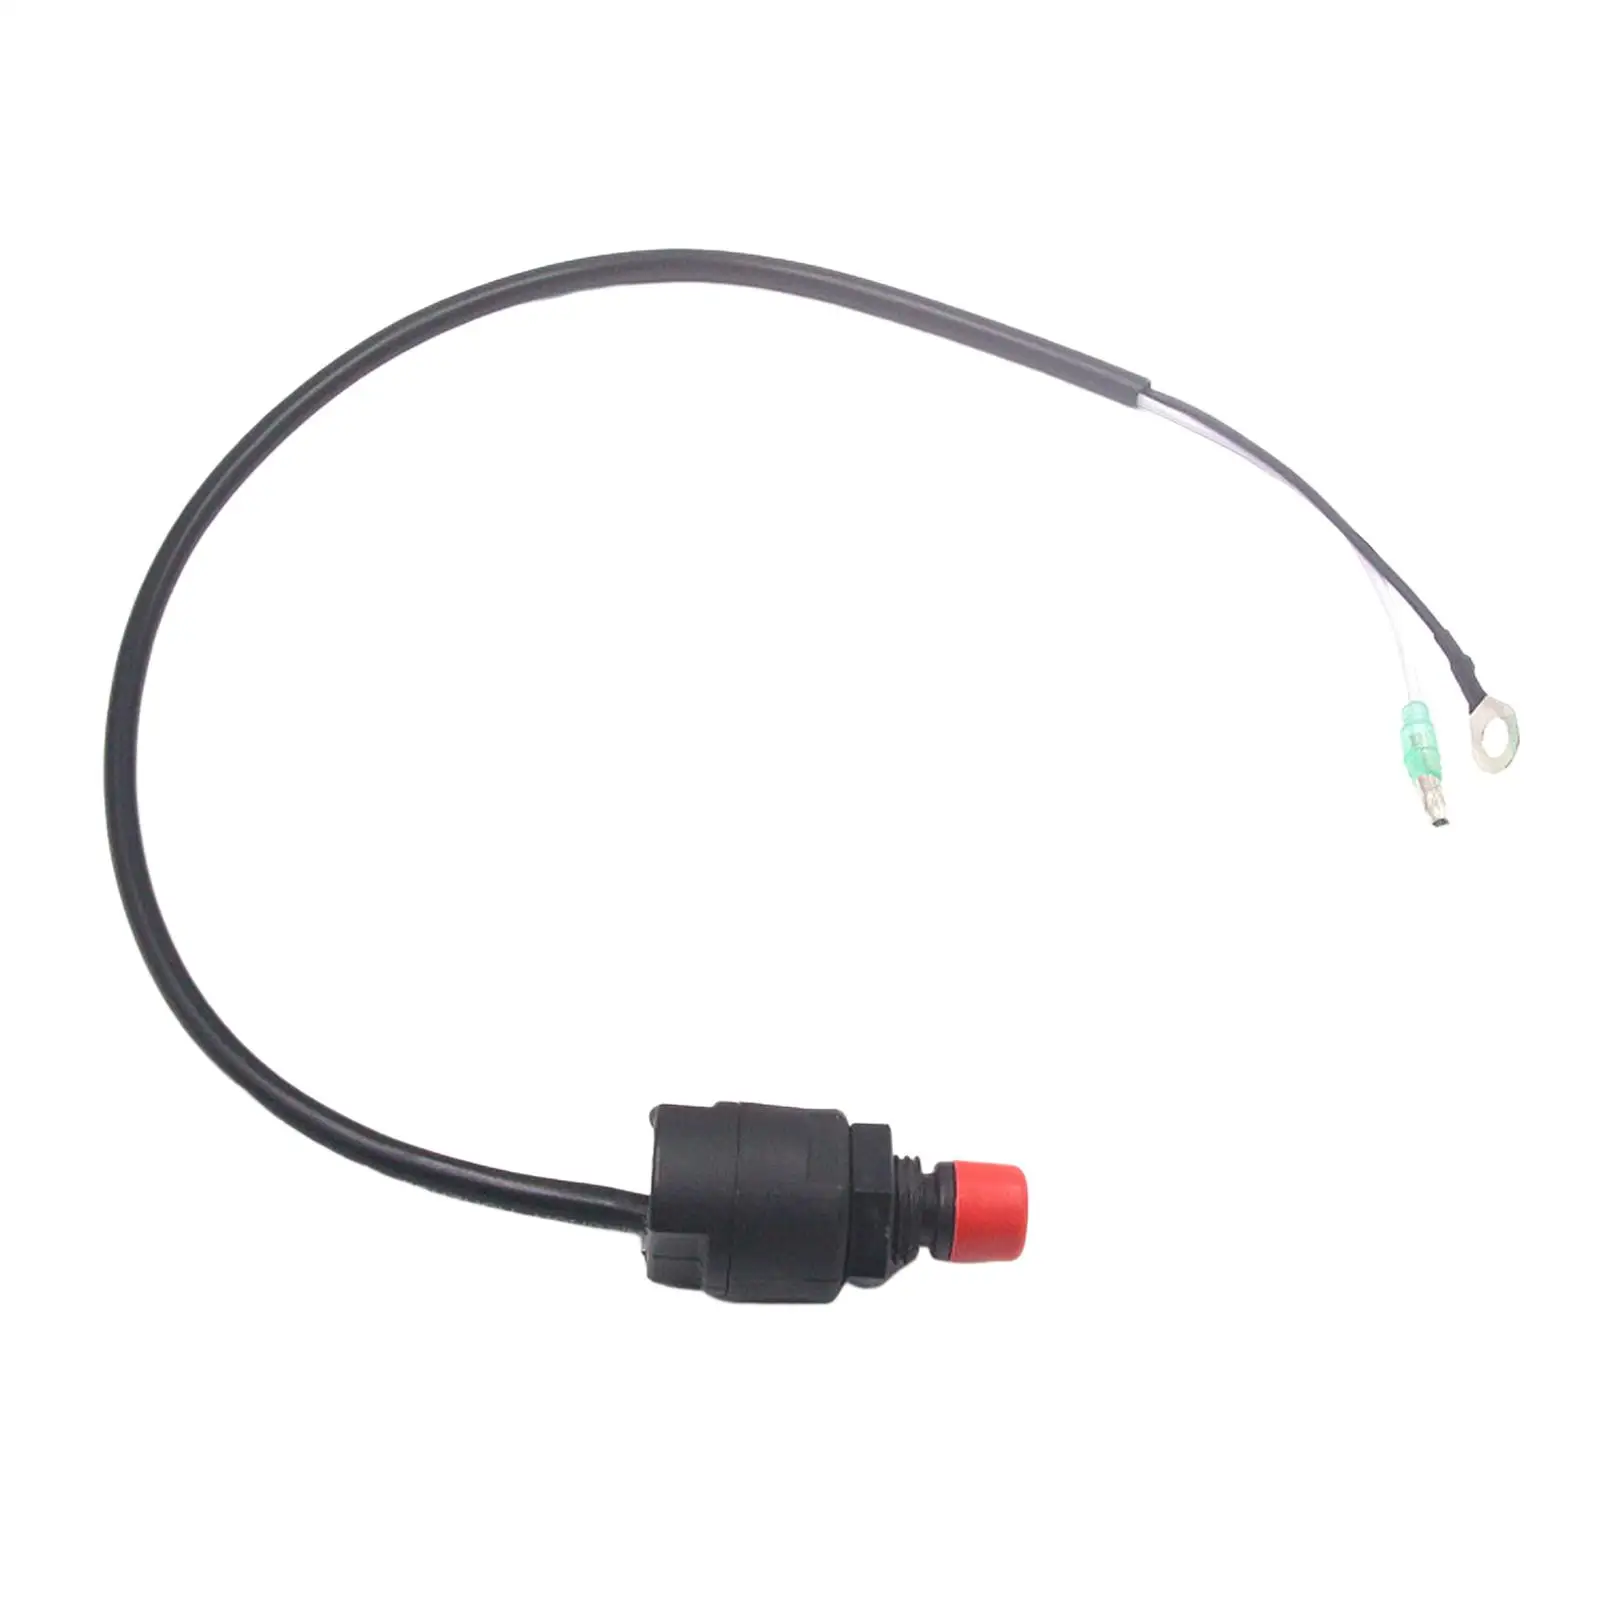 Durable Boat Outboard Kill Stop Switch Replaces Engine Motor Emergency Kill Stop Switch for Dirt Bike Parts Supplies